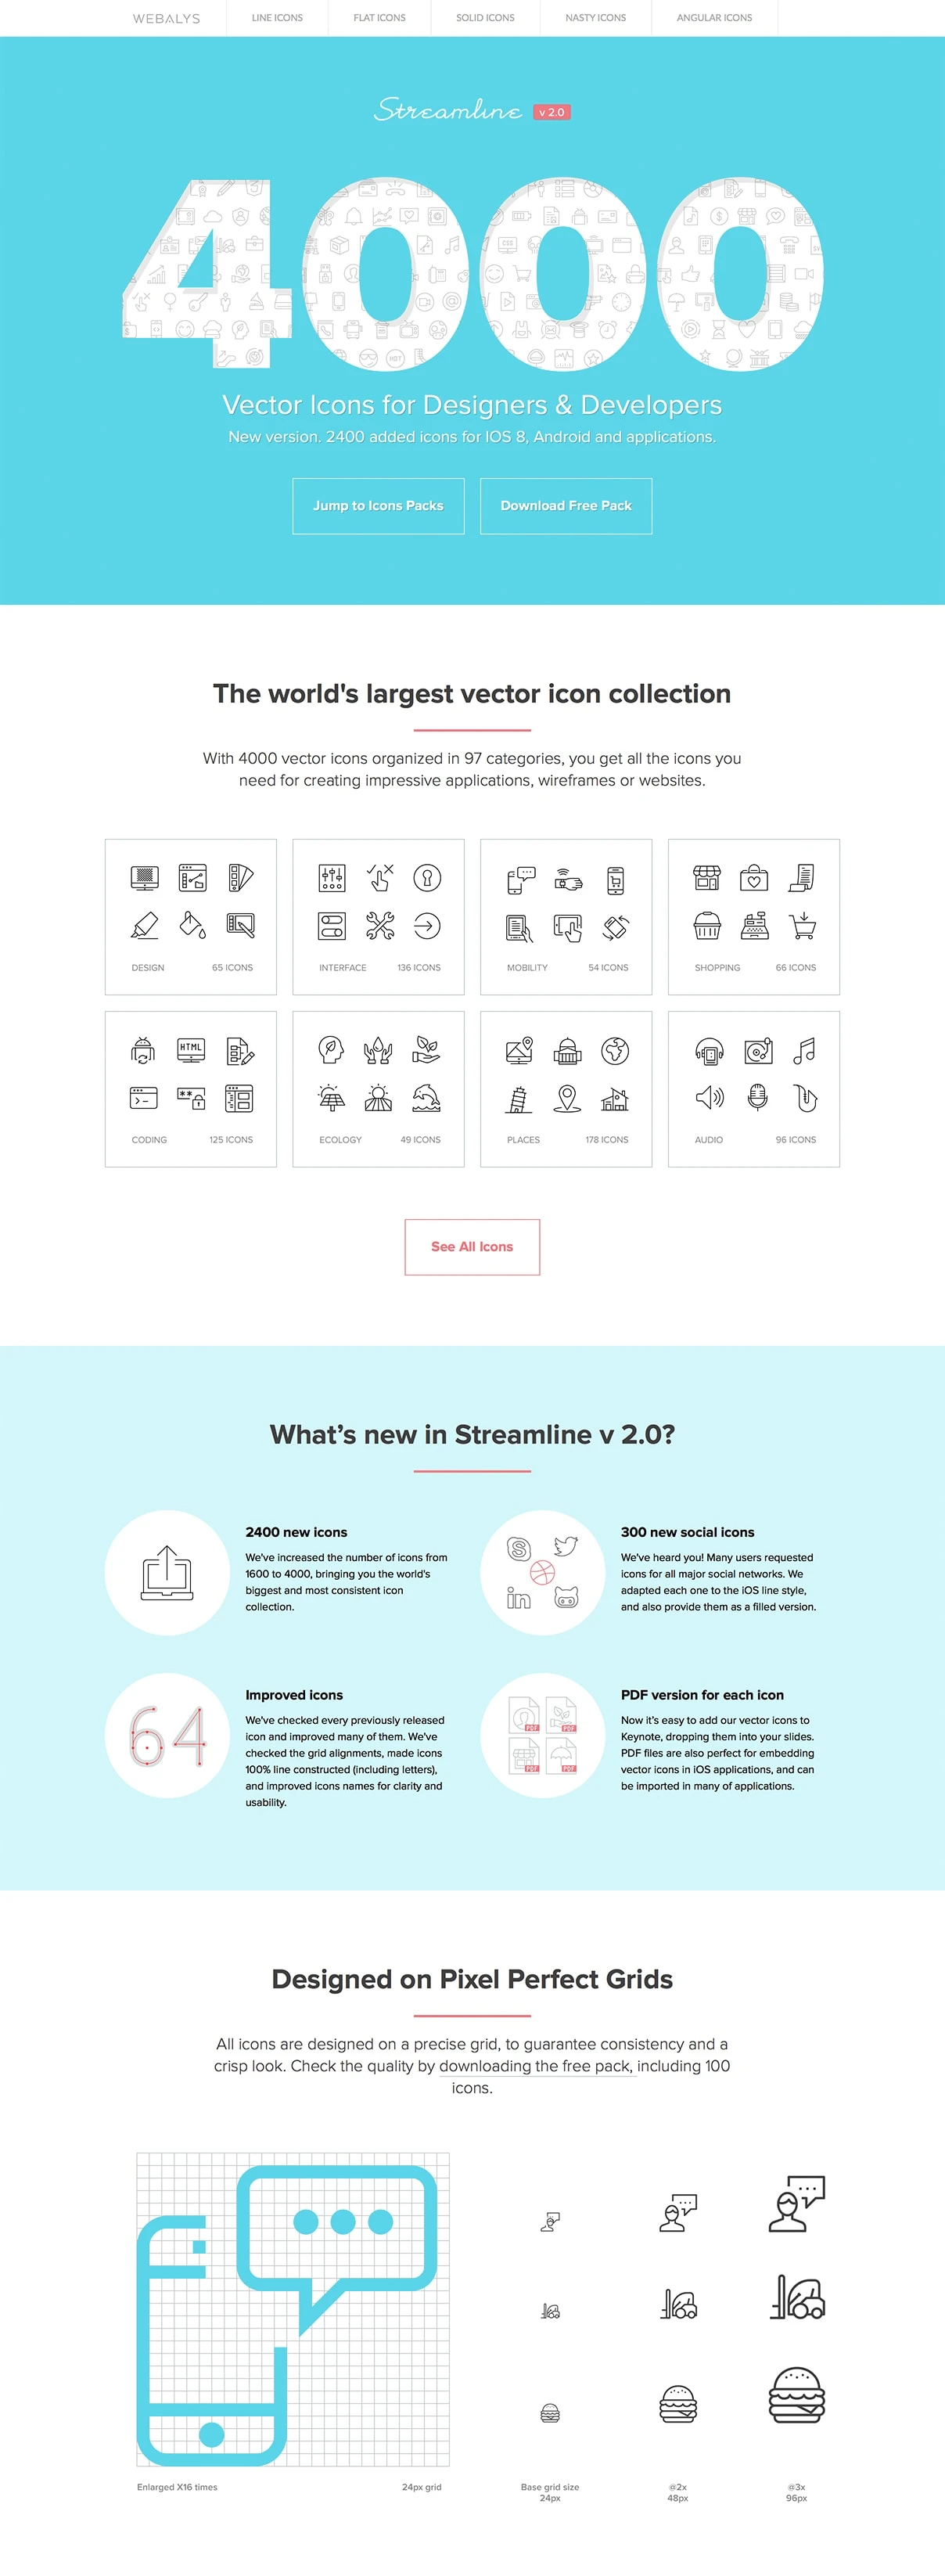 Streamline Landing Page Example: 4000 Vector Icons for IOS, Android and applications. The world's largest icon collection.